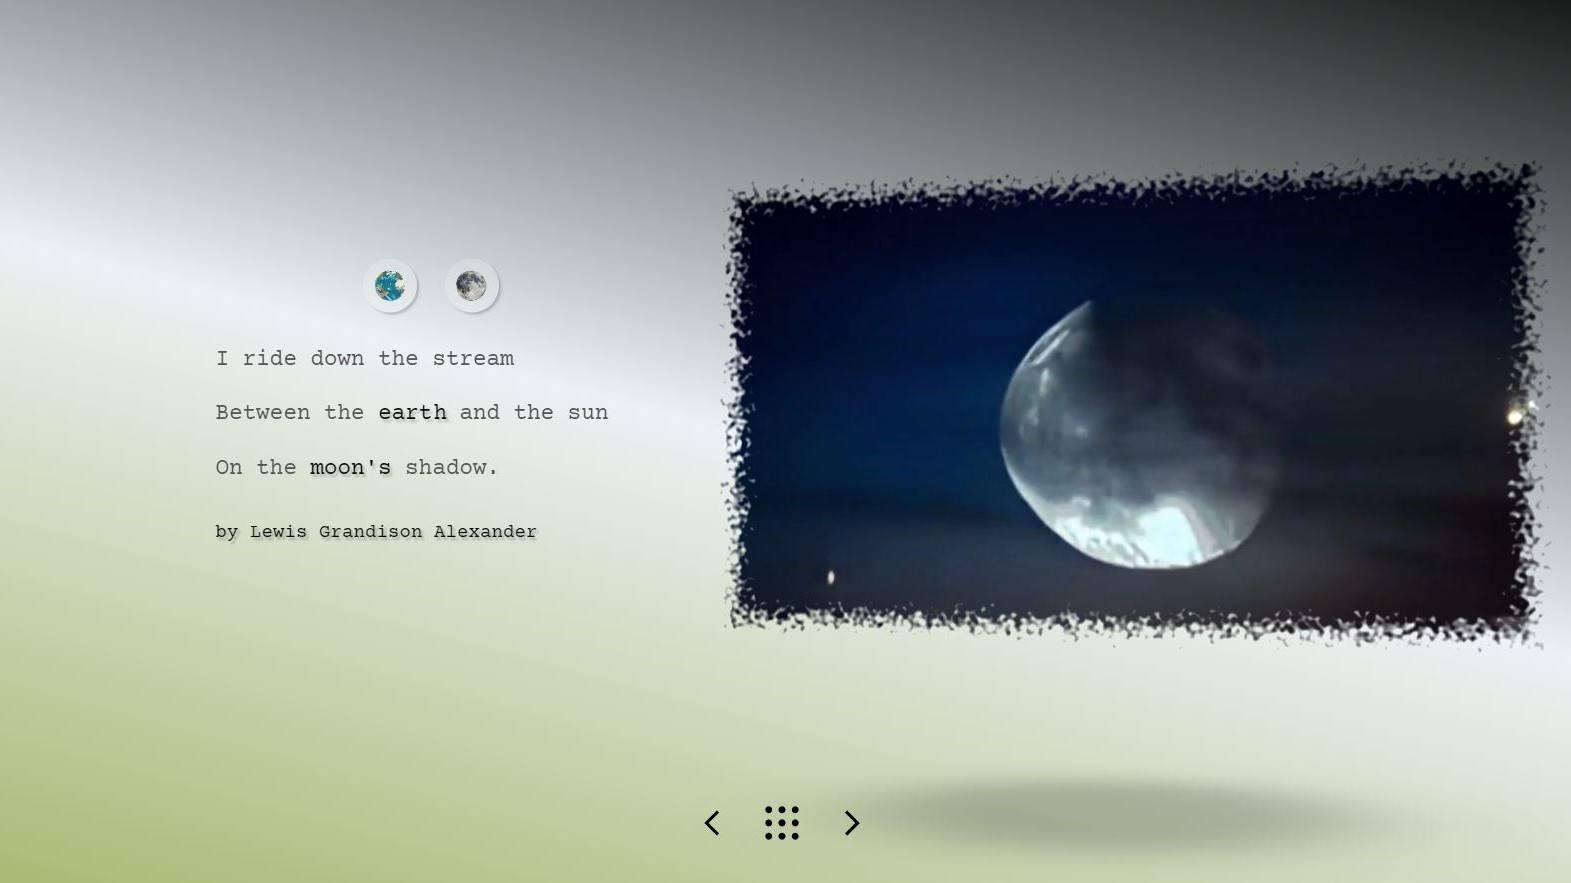 An AI gneerated image of the moon next to a poem about the moon